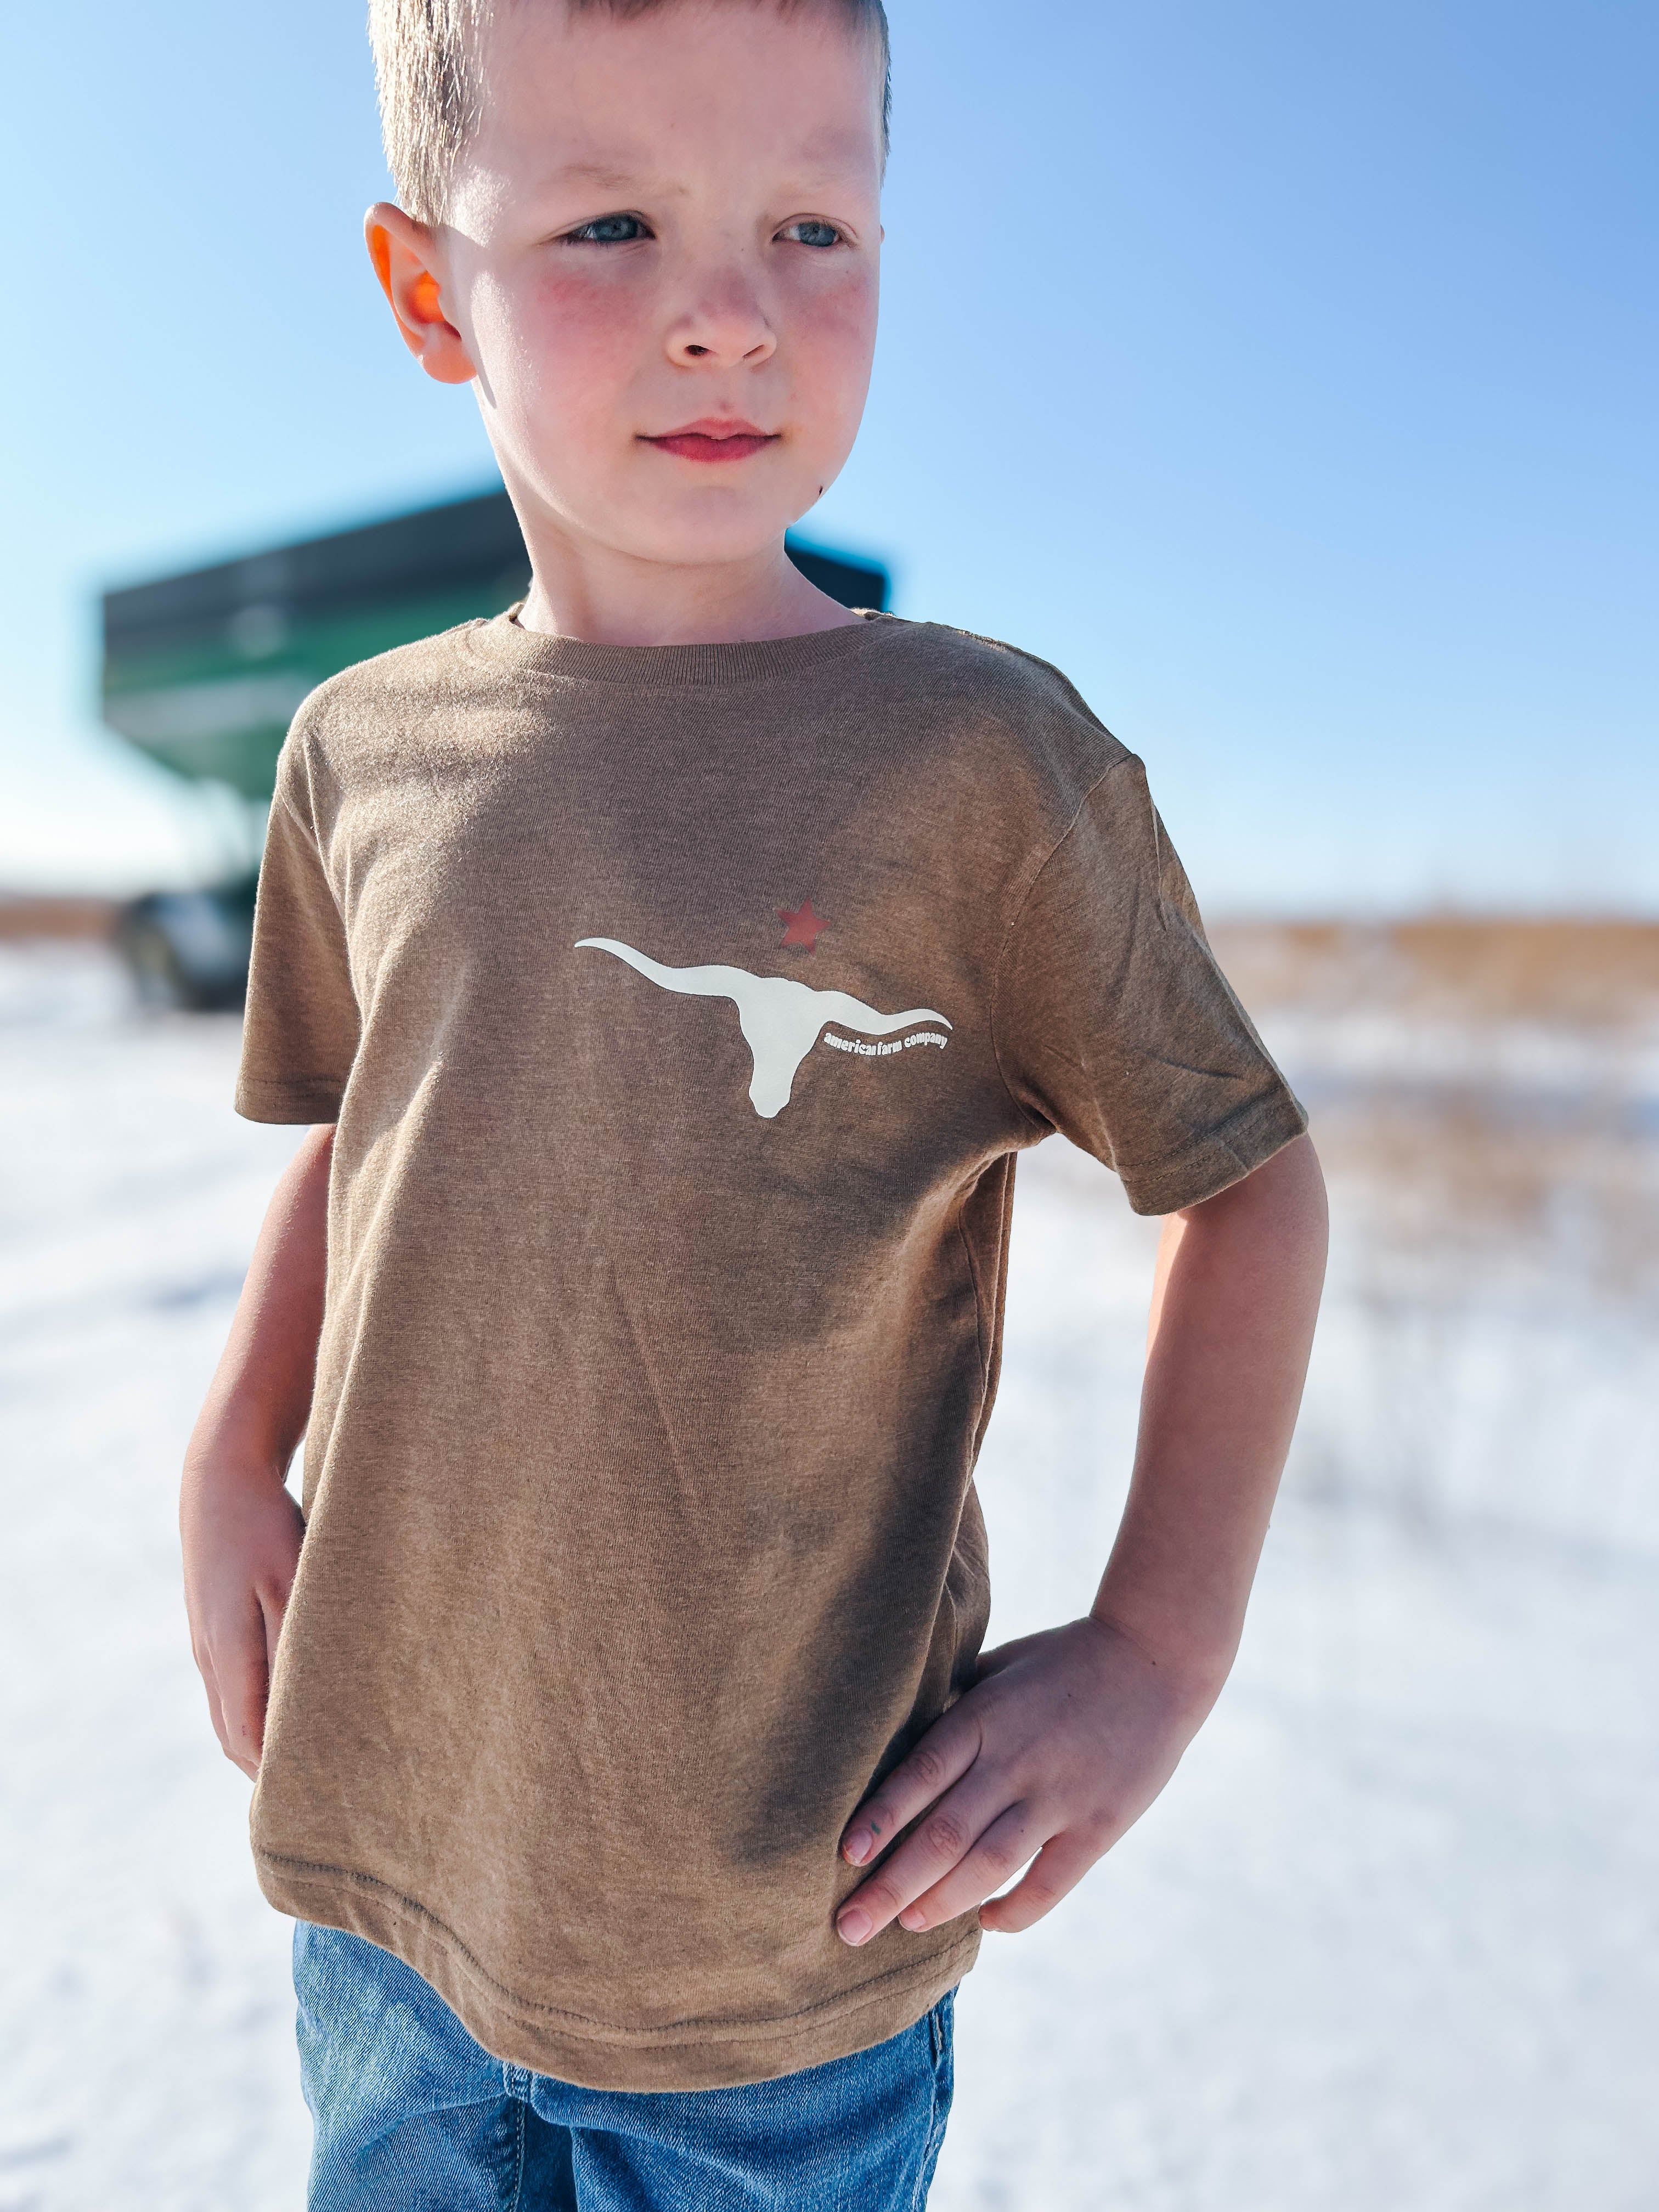 Western Skull 'Support Farmers' Heather Brown Tee- Toddler/Youth